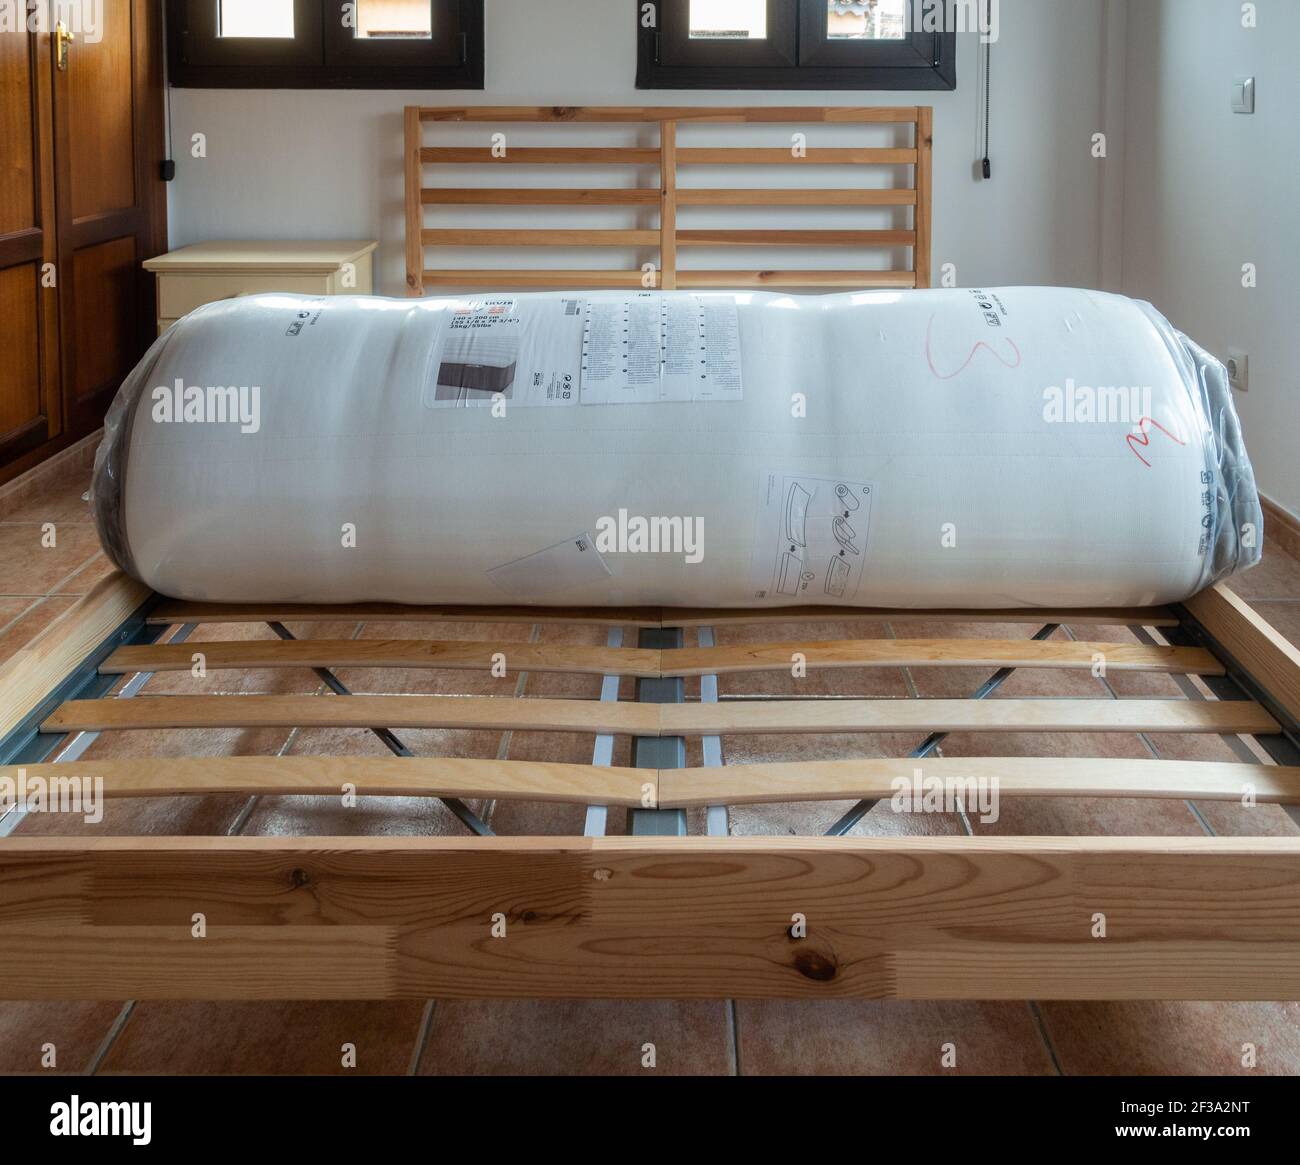 Ikea Hamarvik mattress on Ikea bed frame in house bedroom. Mattress was  delivered rolled and wrapped in thick plastic. Mattress unrolls when opened  Stock Photo - Alamy